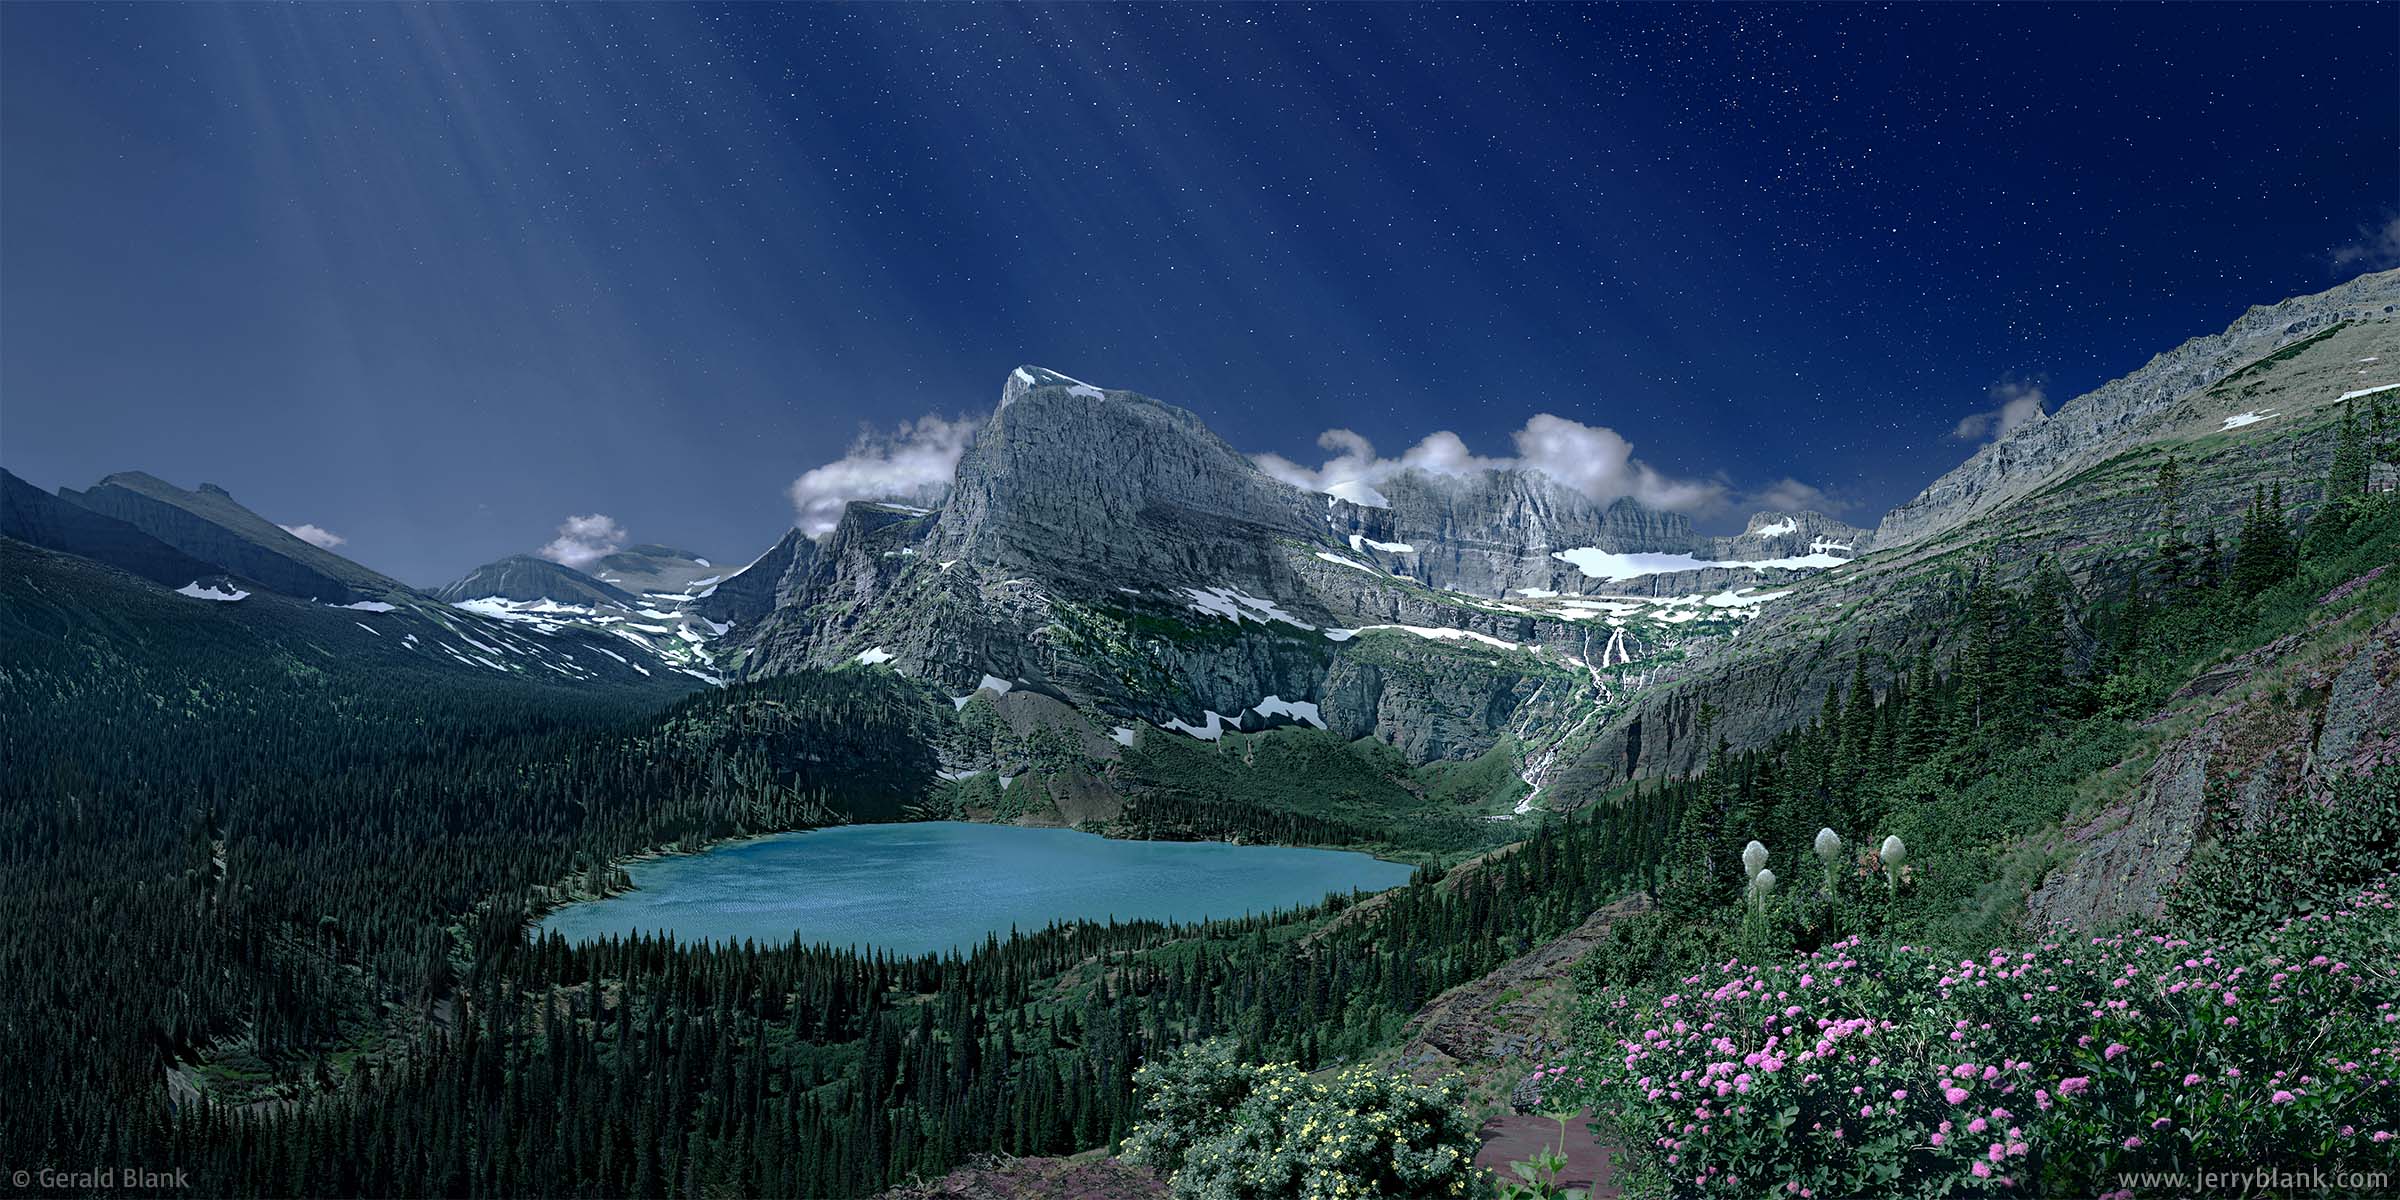 #25019 - A moonlit night view of Grinnell Lake and Angel Wing in Glacier National Park, Montana - photo by Jerry Blank